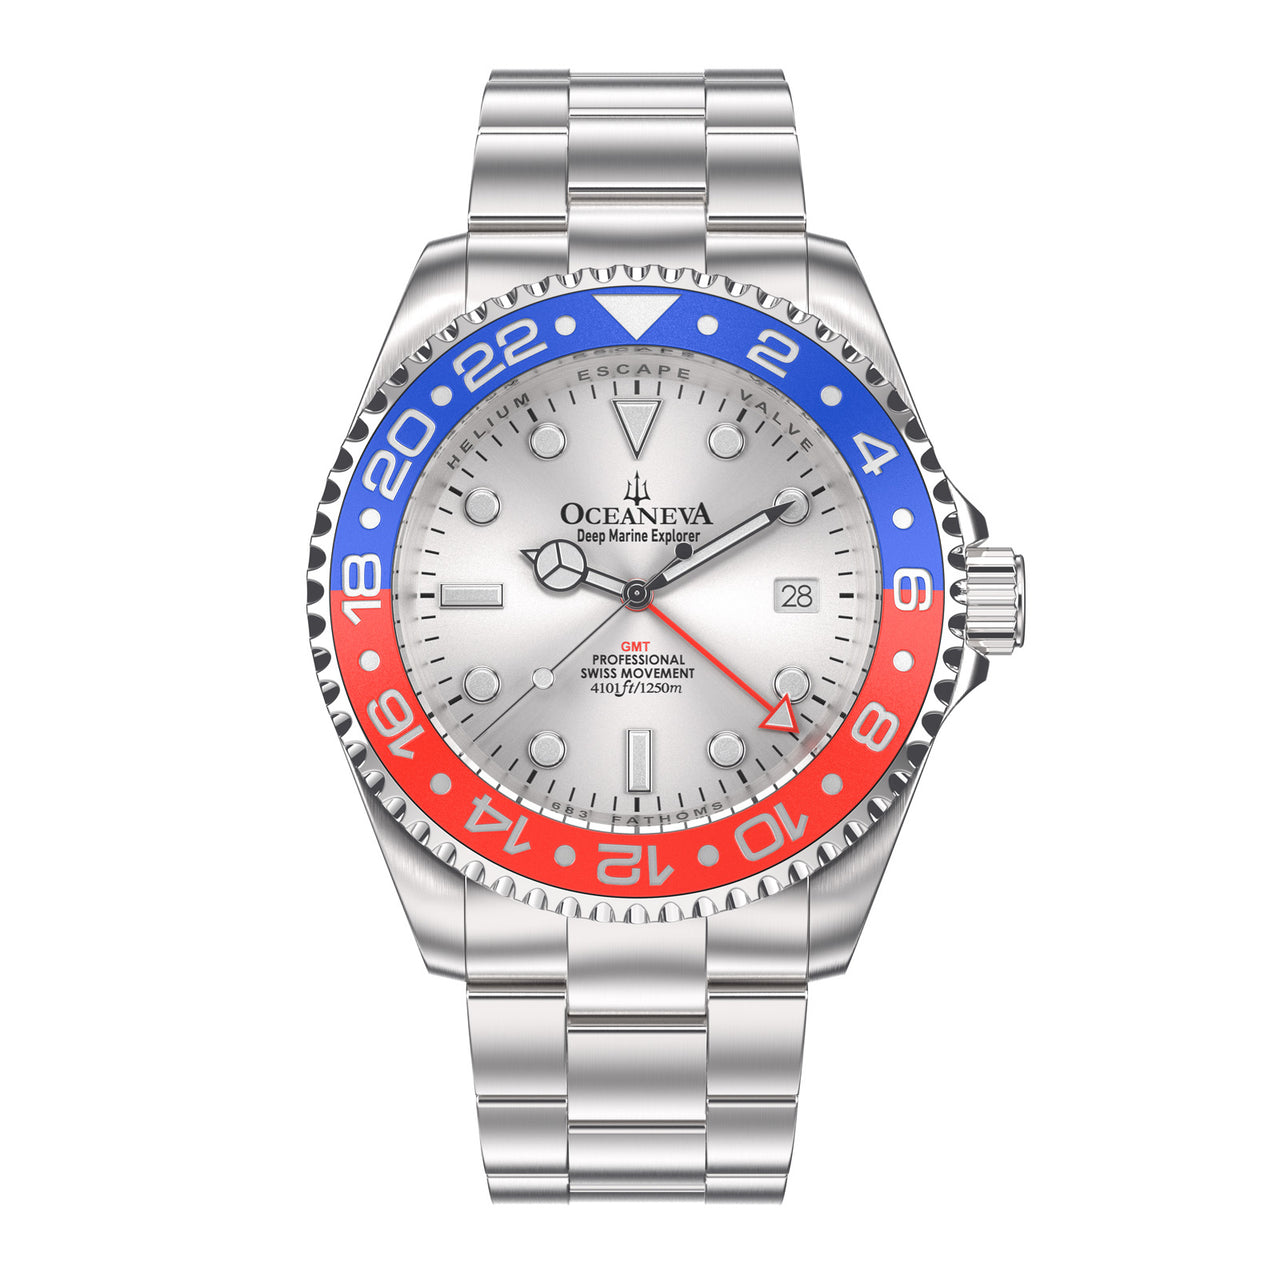 Oceaneva™ Men's GMT Deep Marine Explorer 1250M Pro Diver Watch Blue and Red Silver Dial